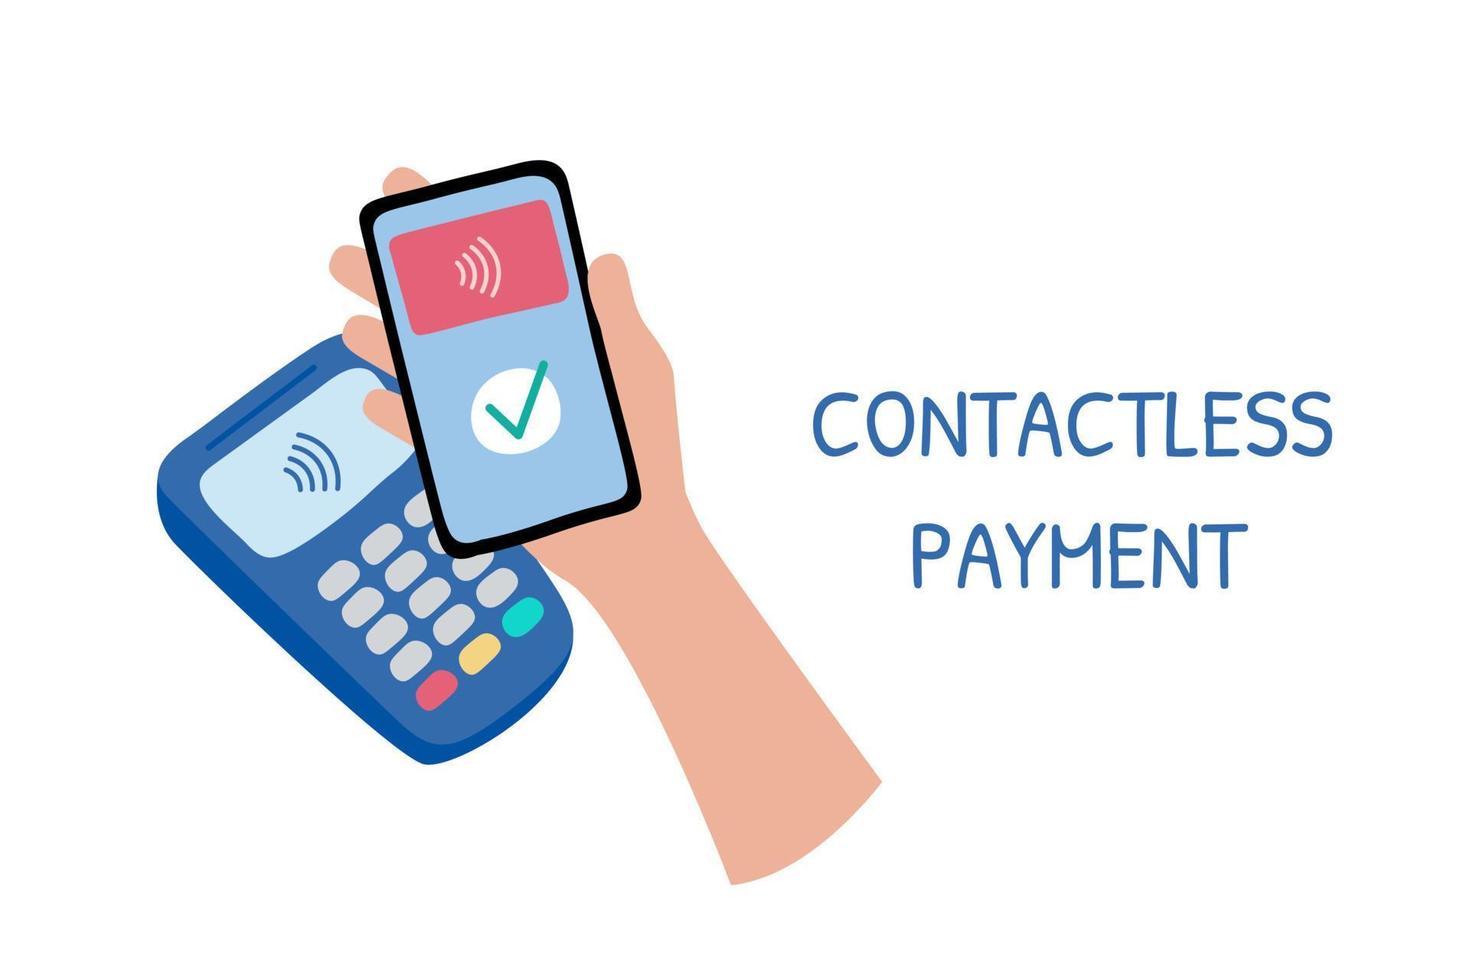 Contactless payment. Phone in hand. Purchase payment by NFC technology in smartphone and POS terminal. Near Field Communication. Cashless paying. Flat vector illustration